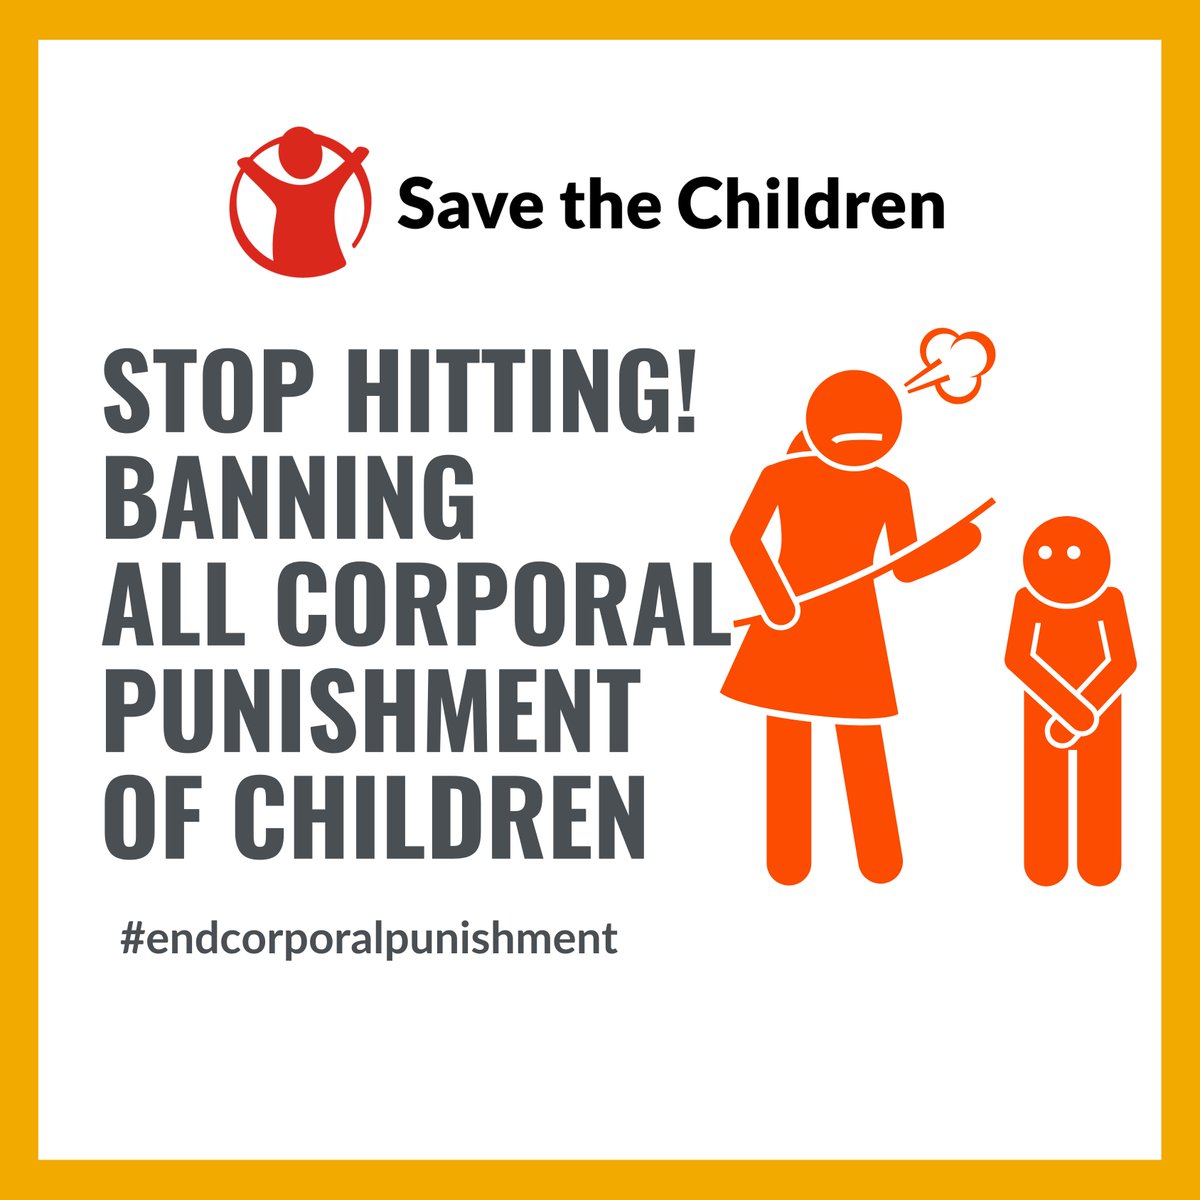 2015: the world promises to end violence against children by 2030
2024: corporal punishment is still lawful for 86% of the world’s children
Act now to keep our 2030 promise to children
#sgd16 #sdg16.2 #endcorporalpunishment